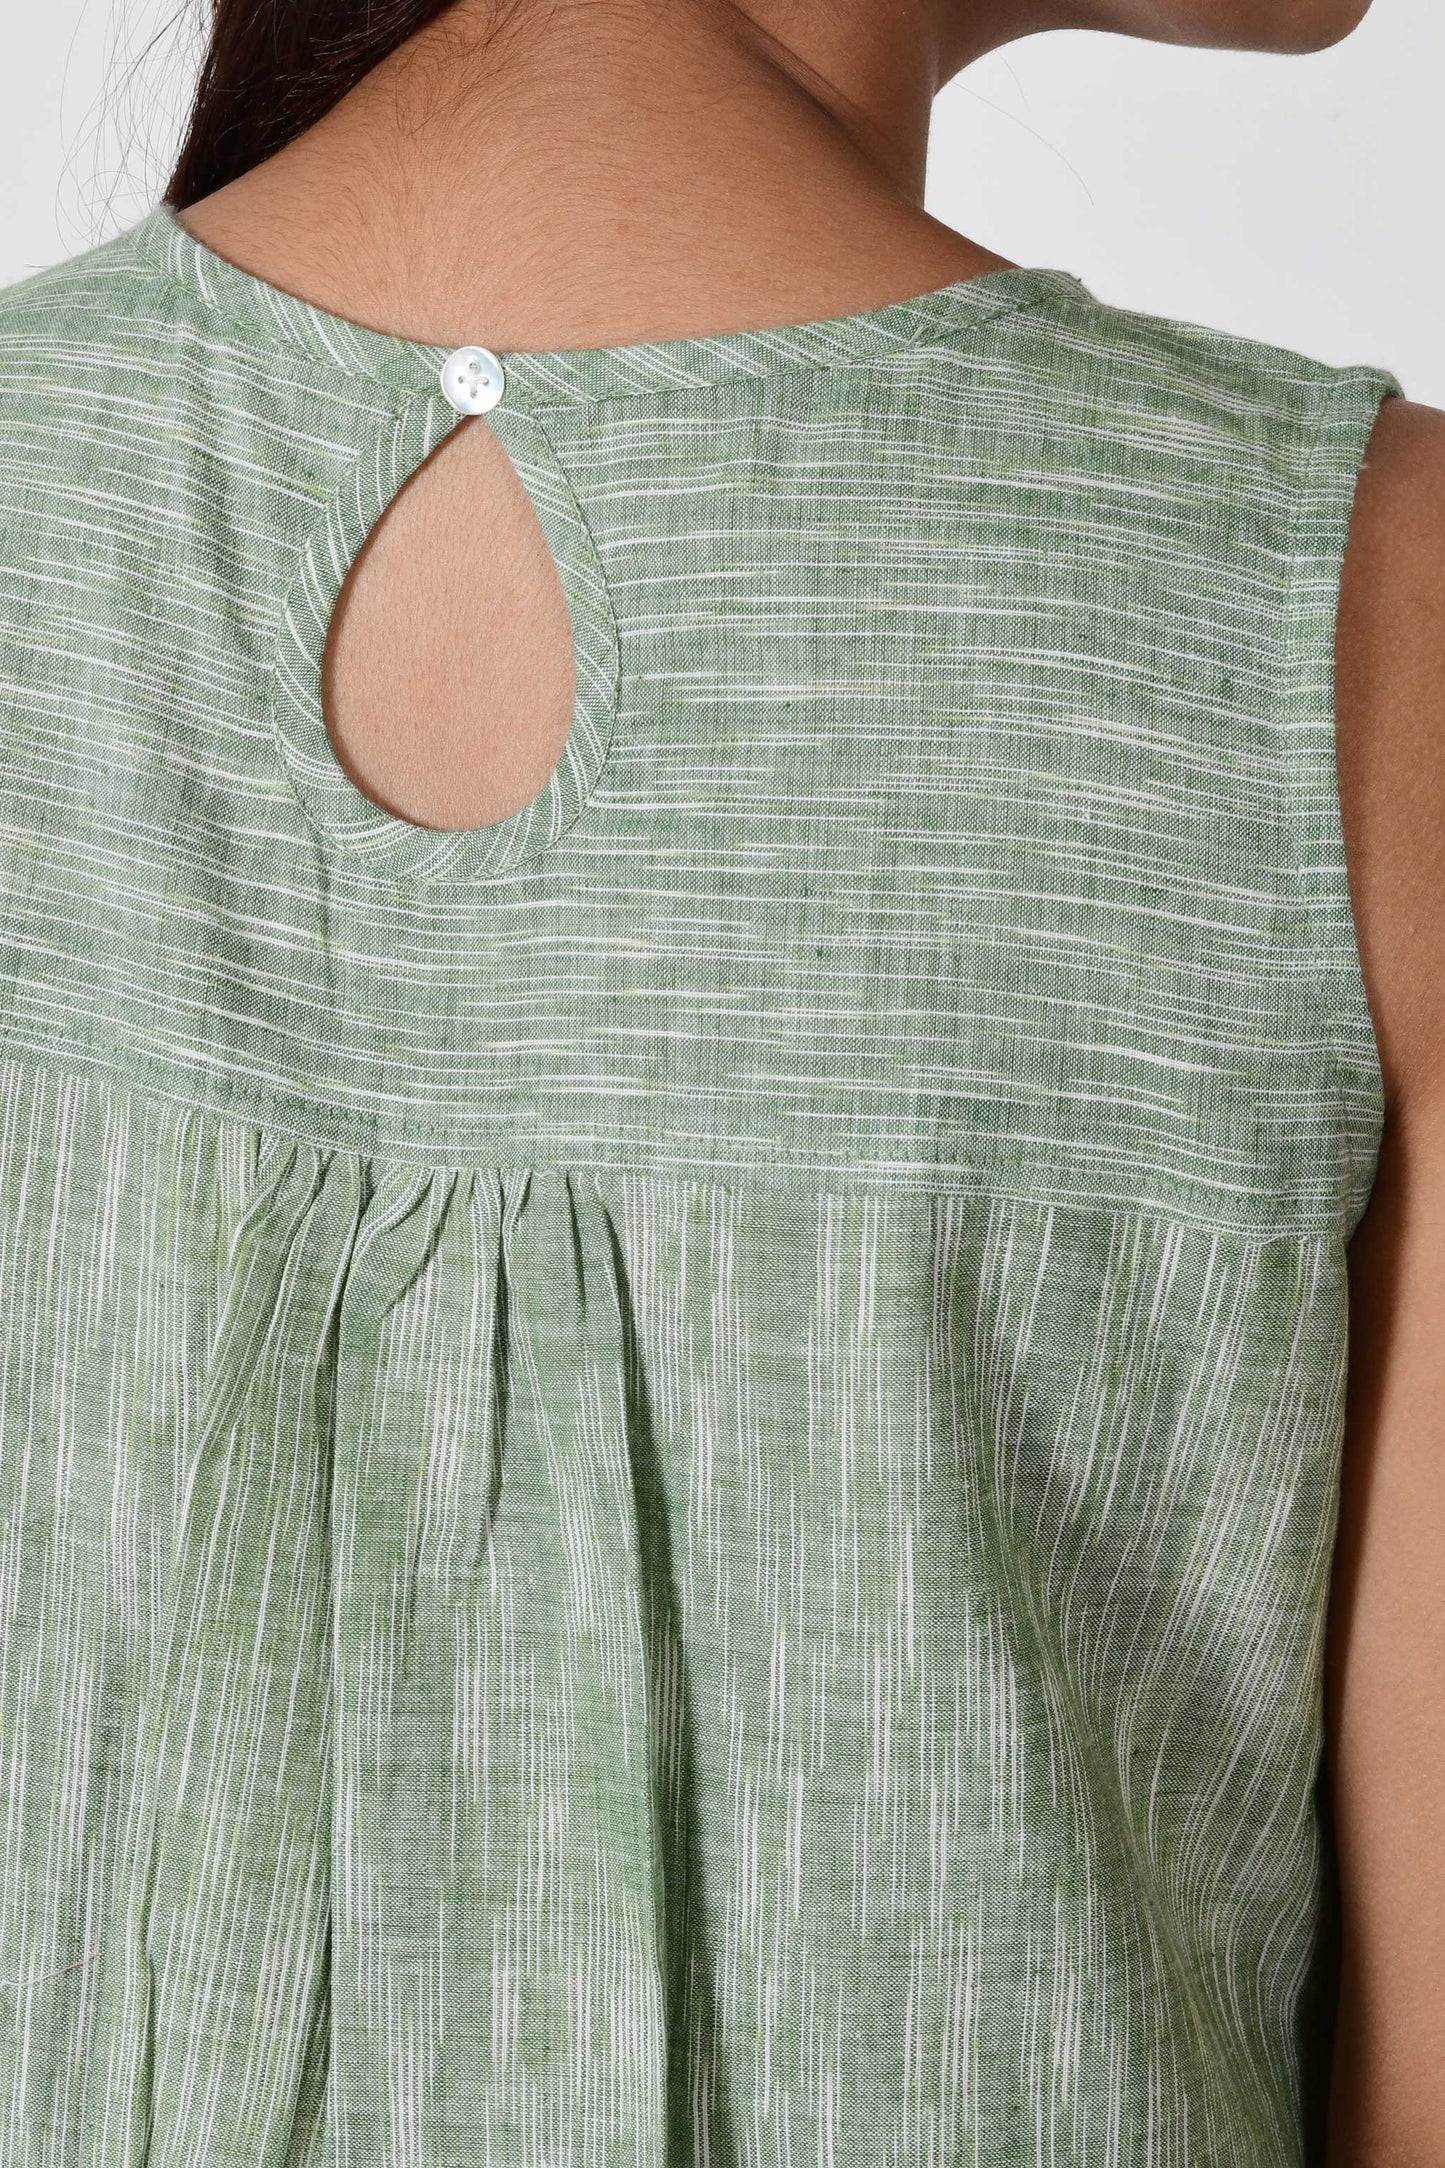 close up of button on the back of the dress made with green texture cotton fabric that is hand spun.